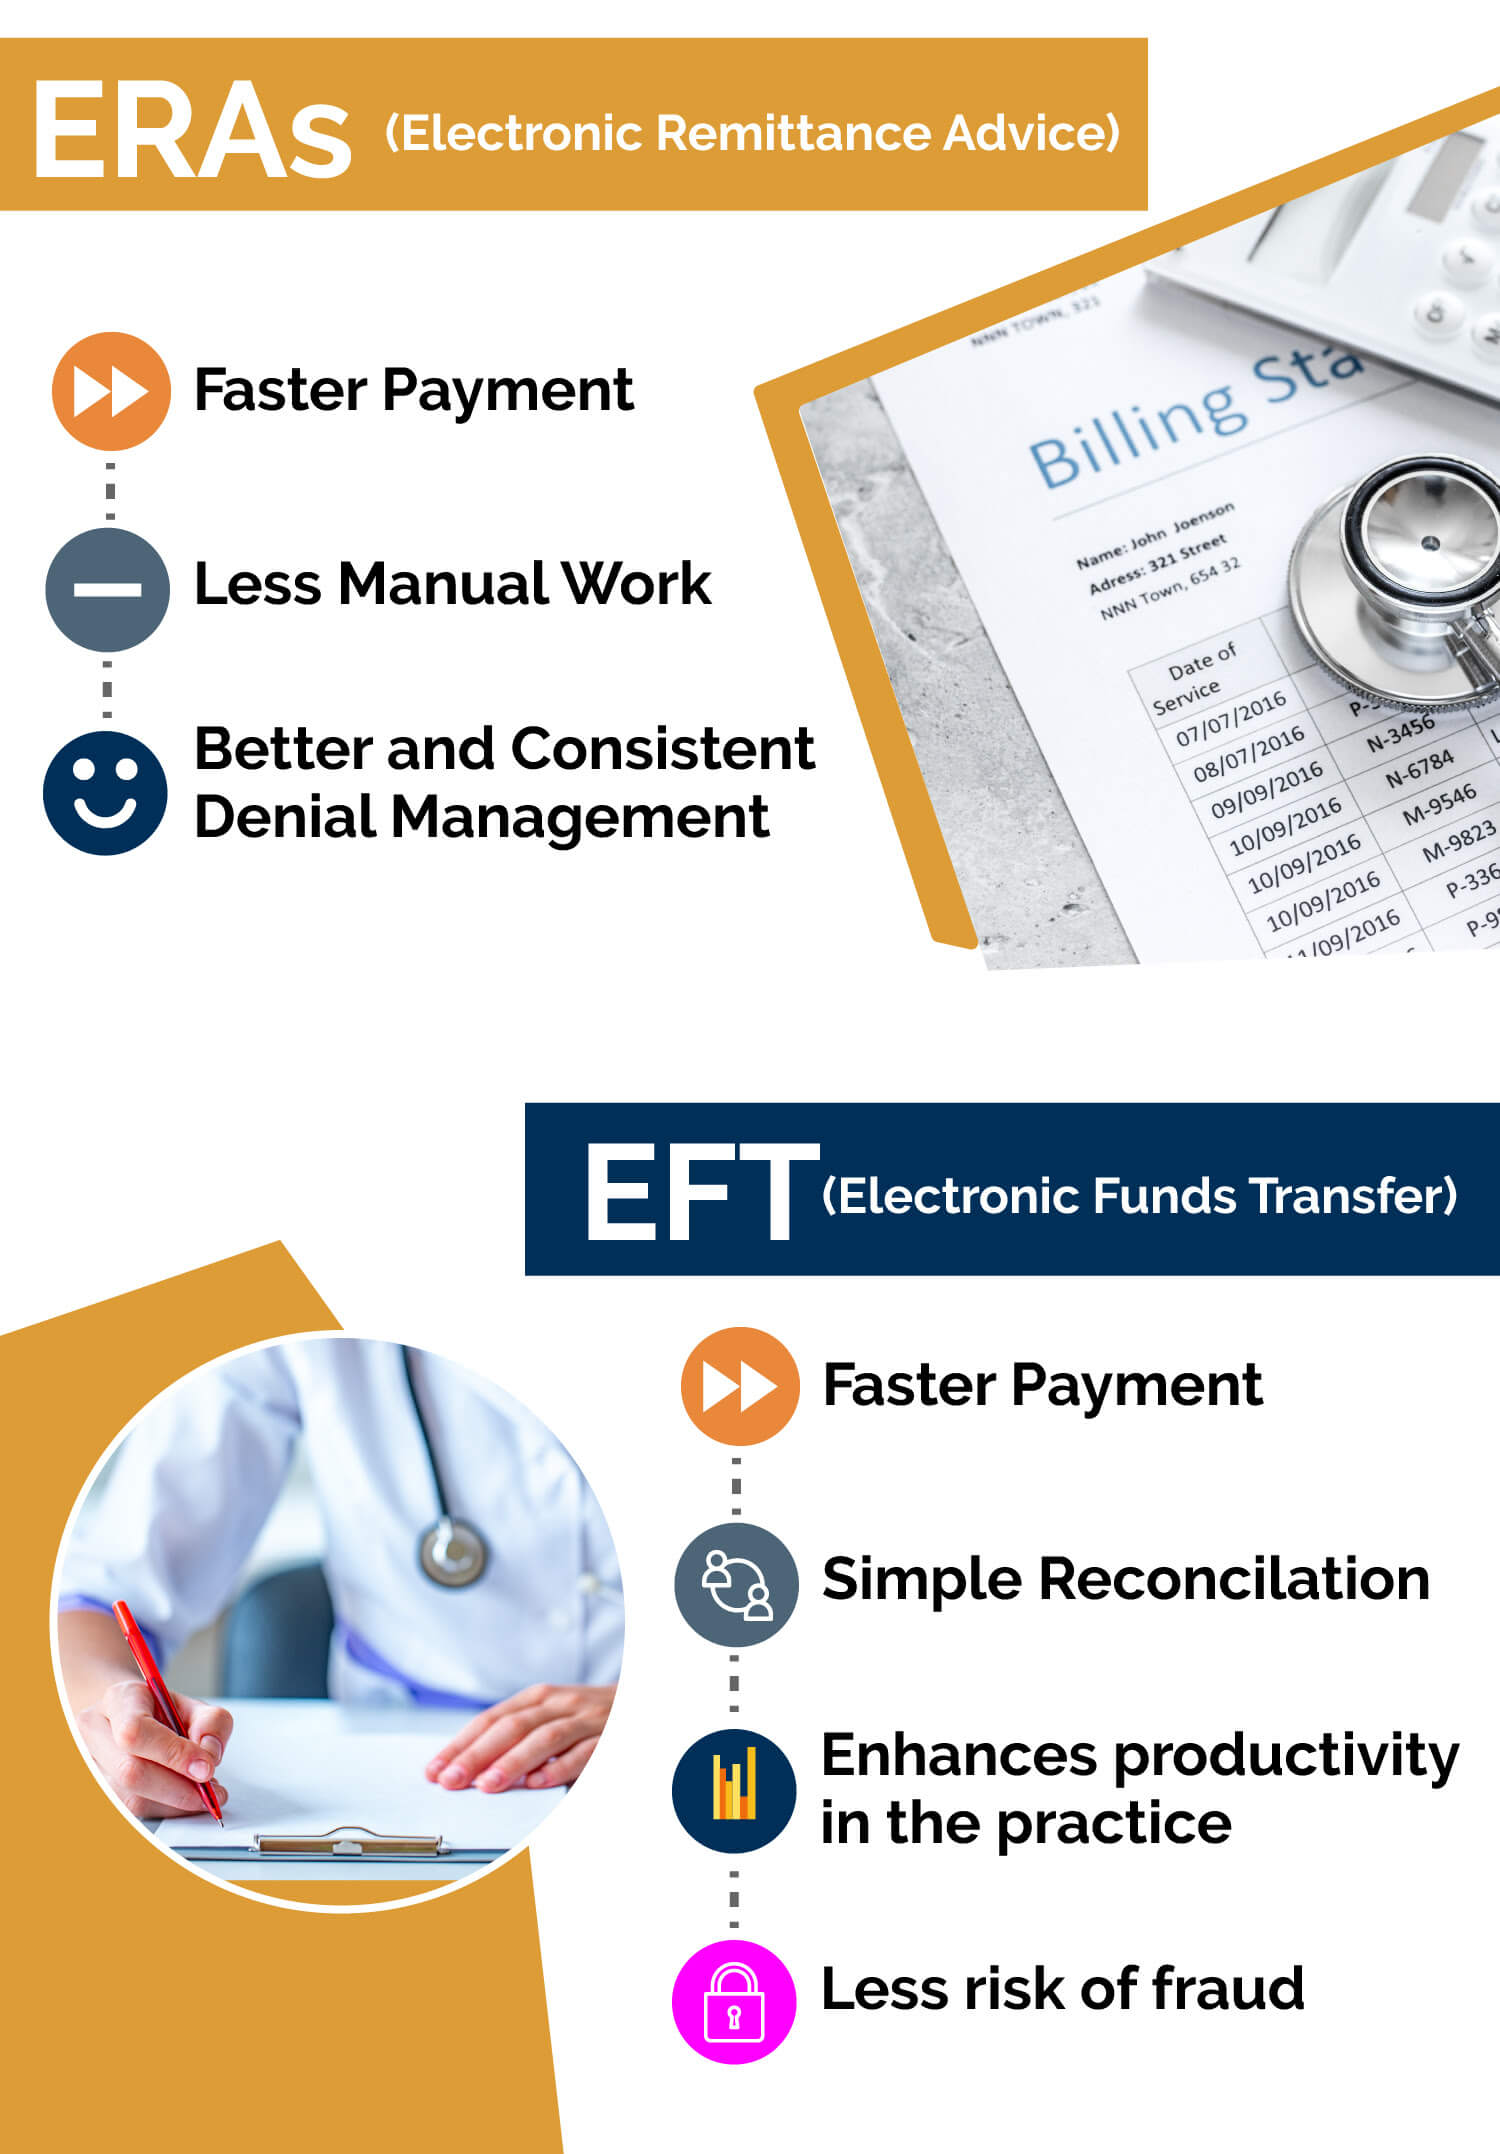 WHAT ARE THE ADVANTAGES OF EOBs, EFT, AND ERAs?